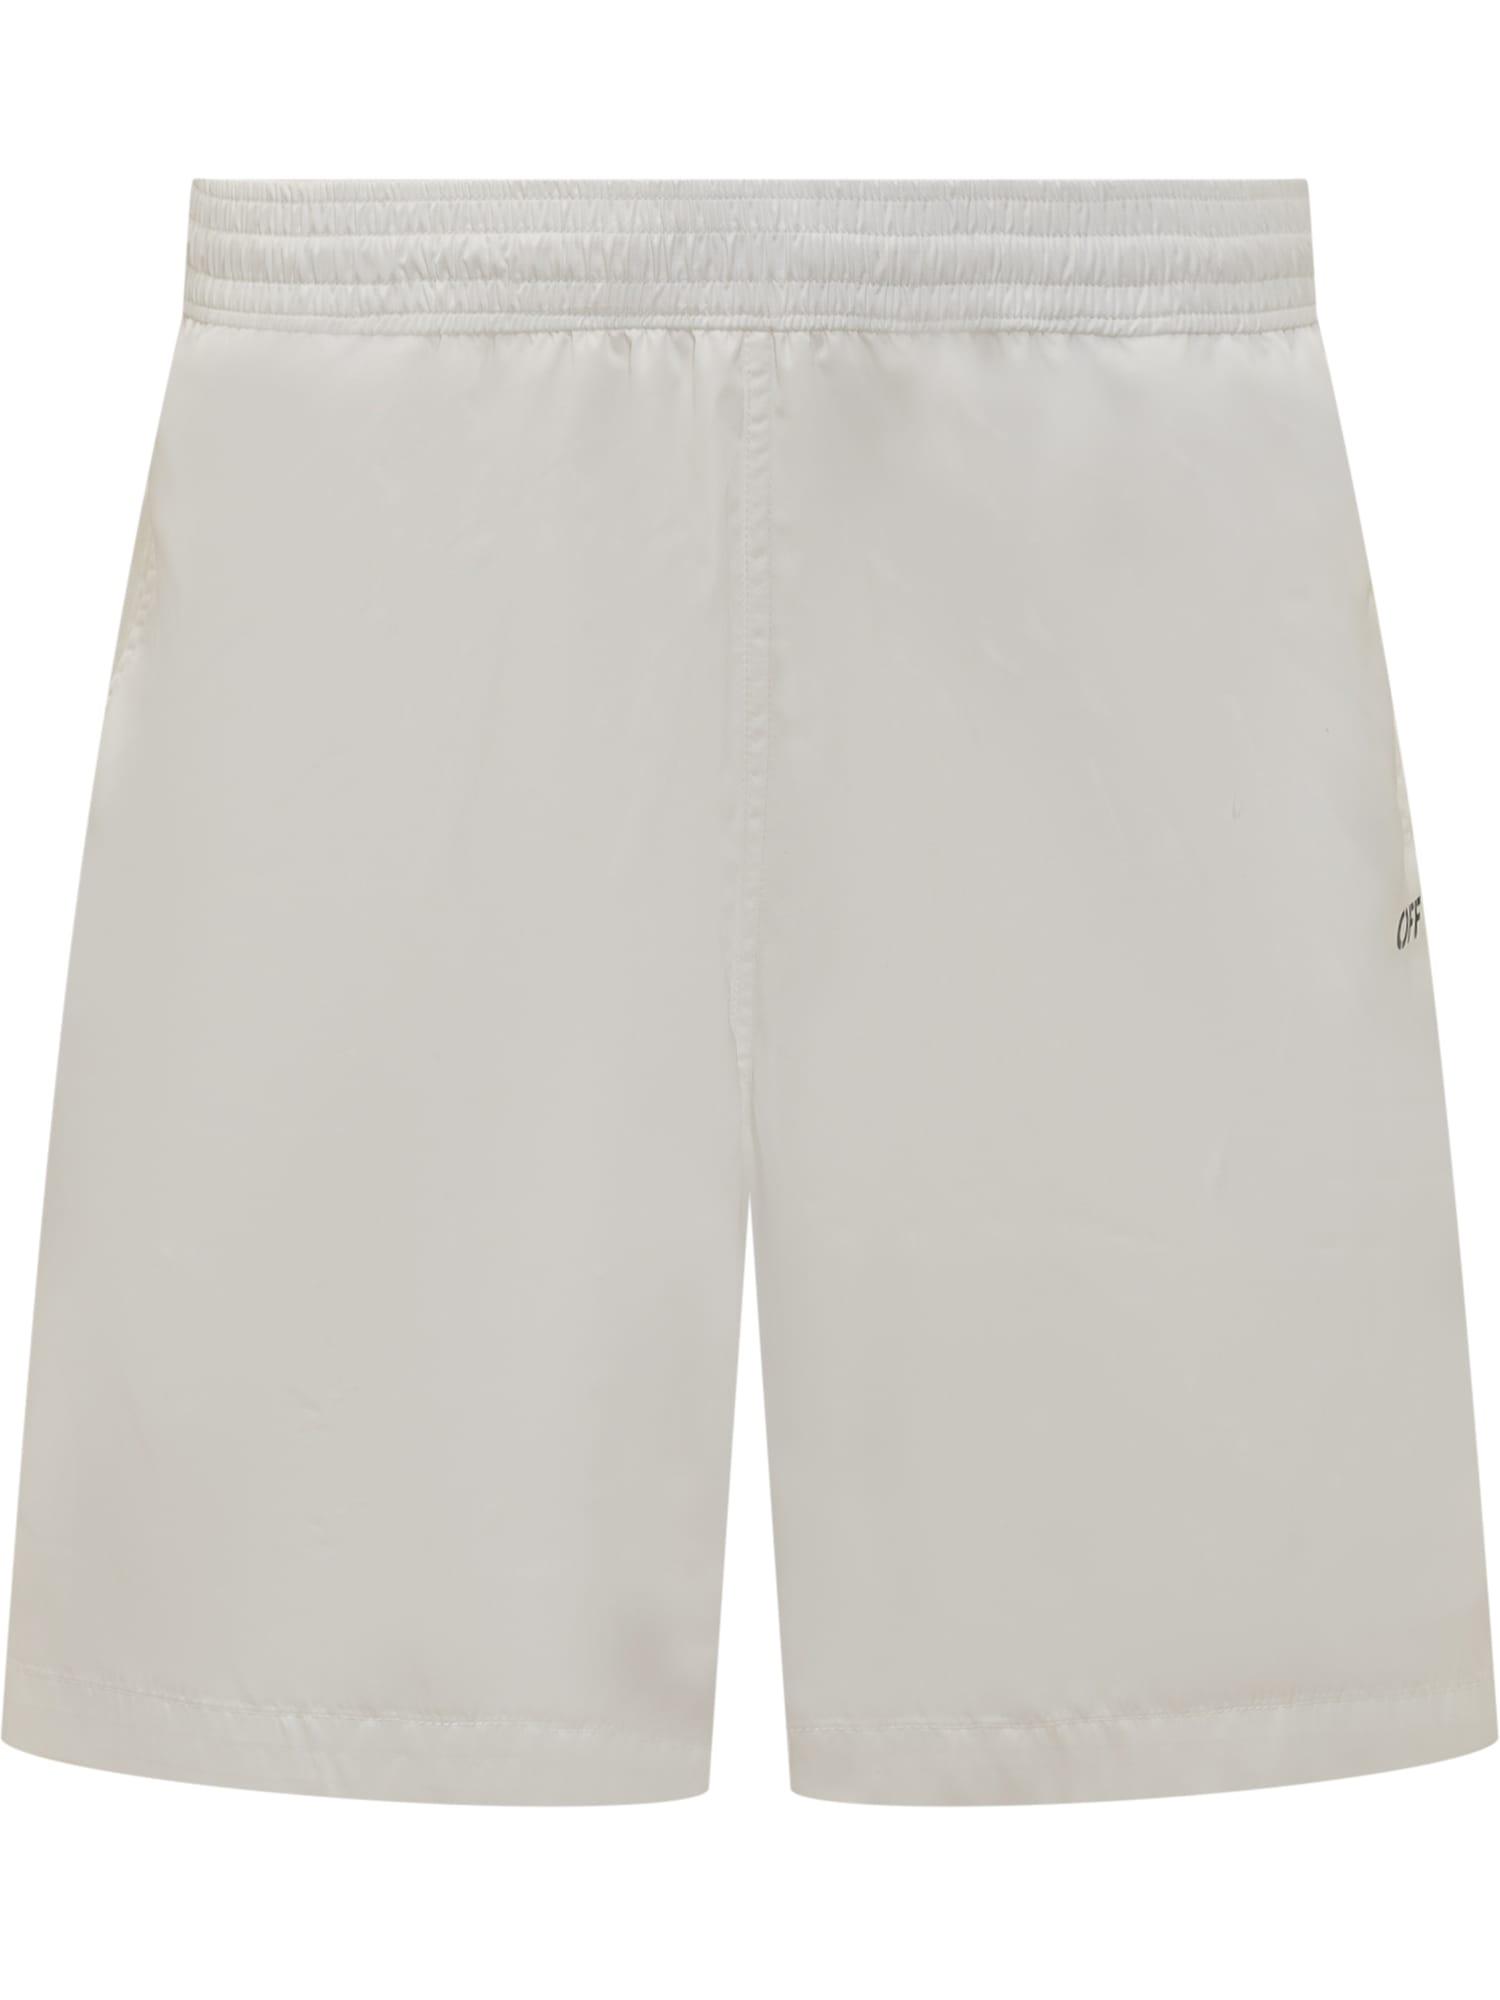 Off-White Swimshorts With Scribble Motif